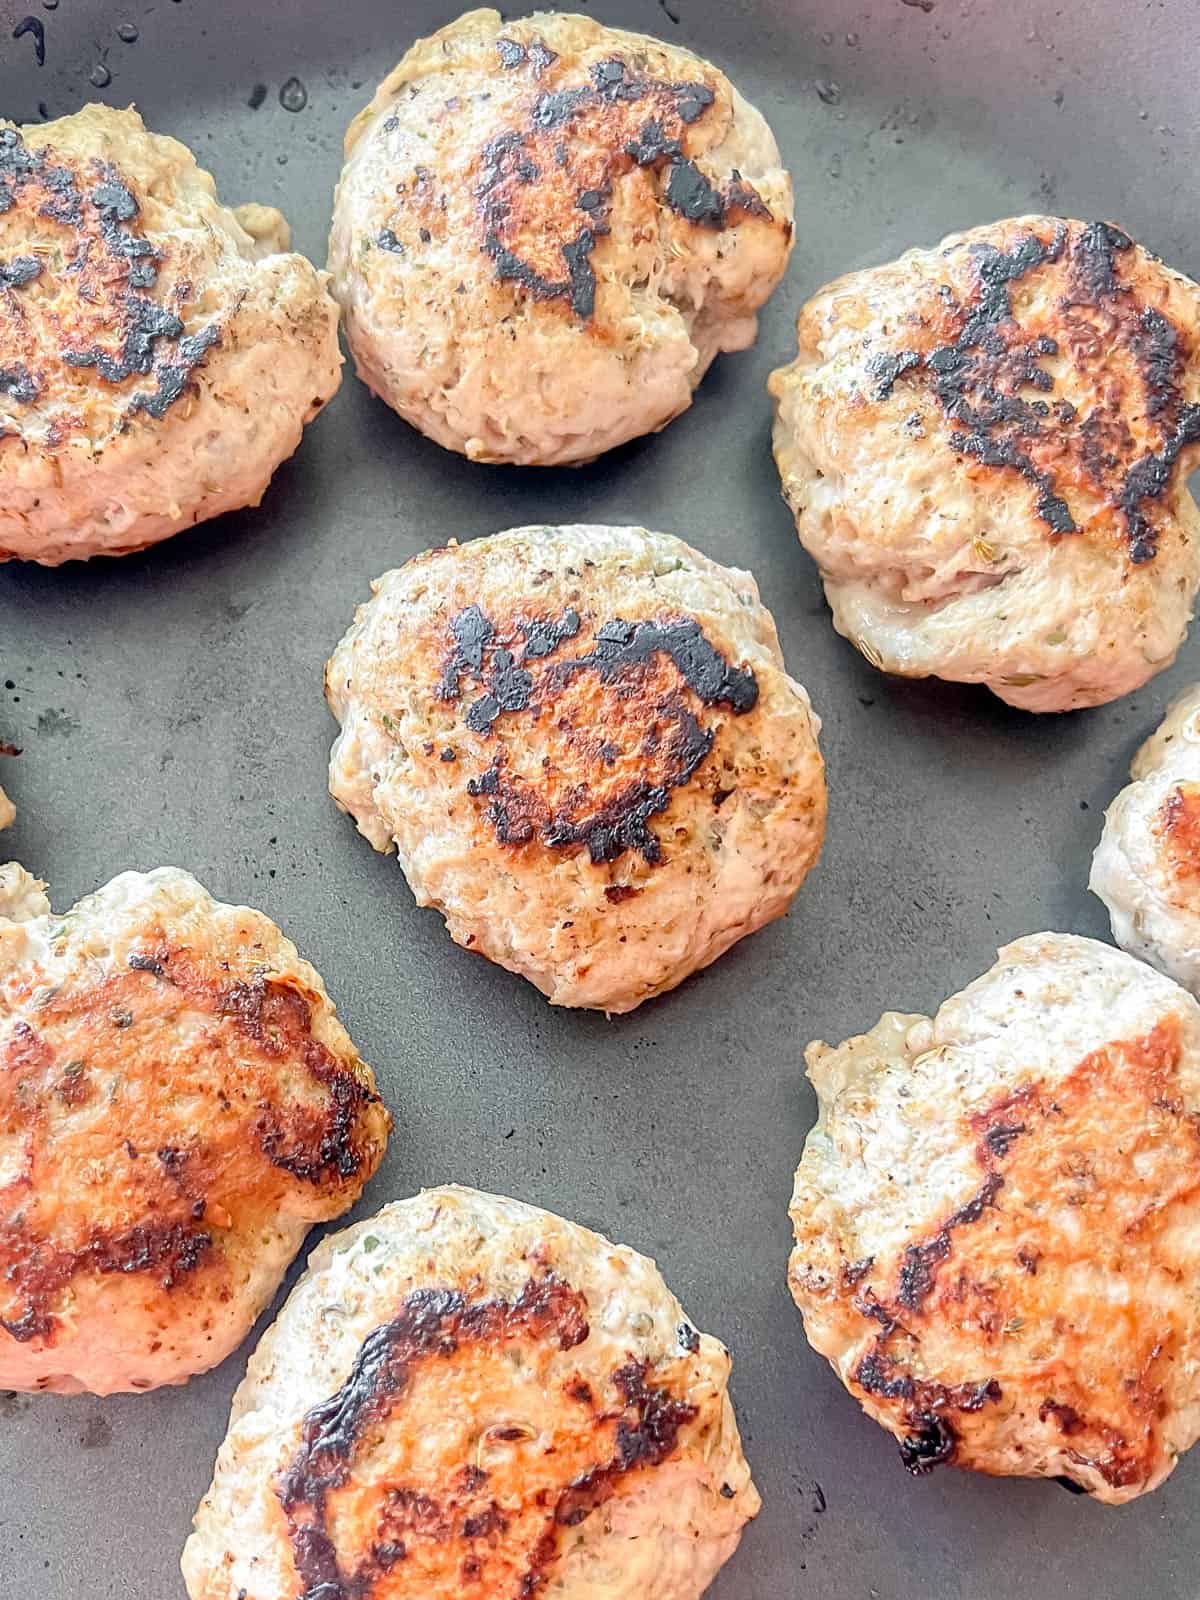 Turkey sausage patties in a pan after cooking.